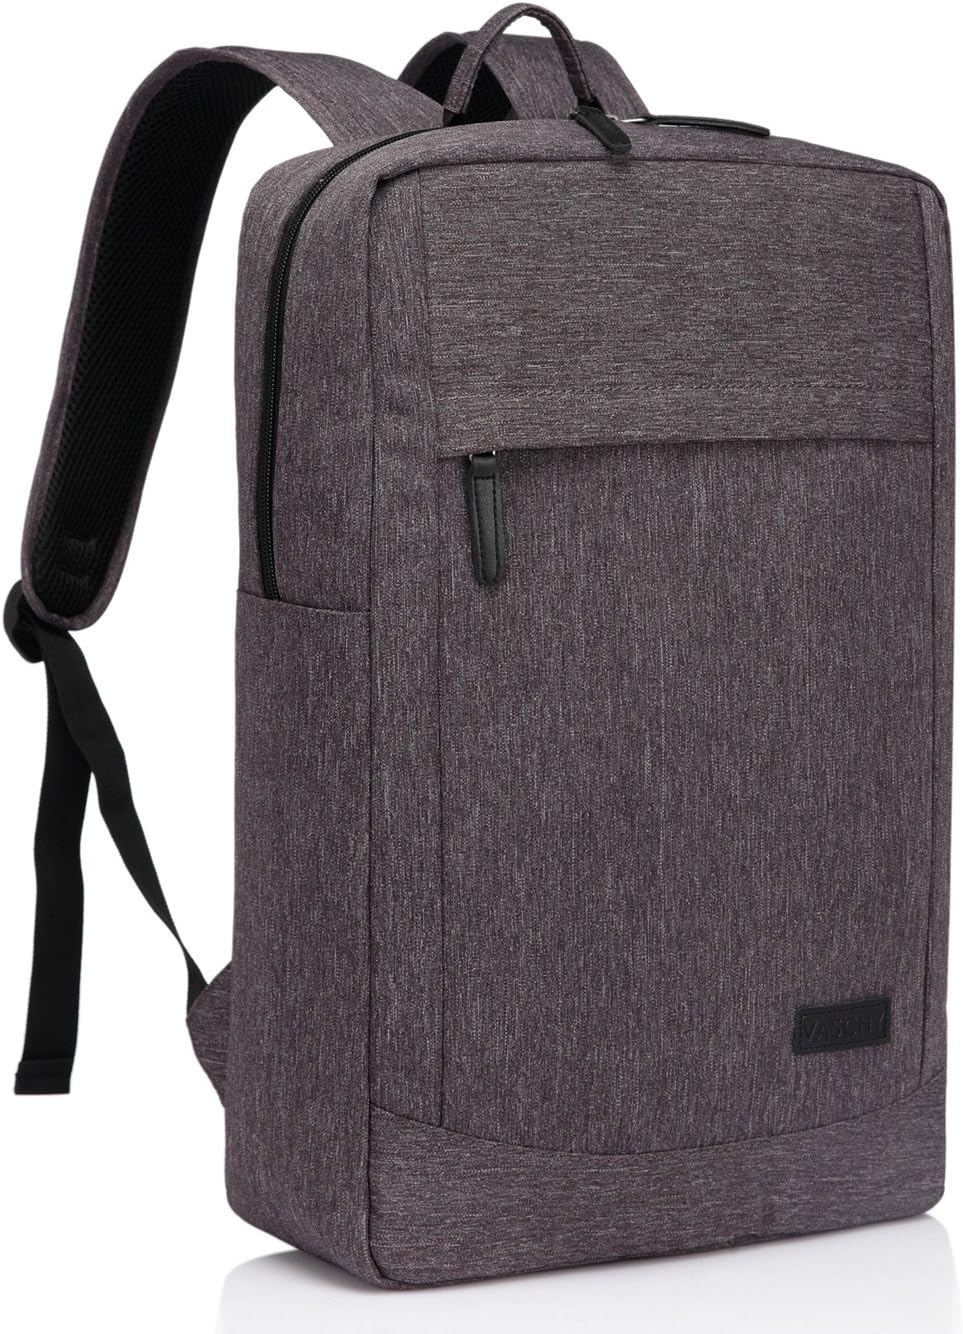 ogio-laptop-backpack in gray